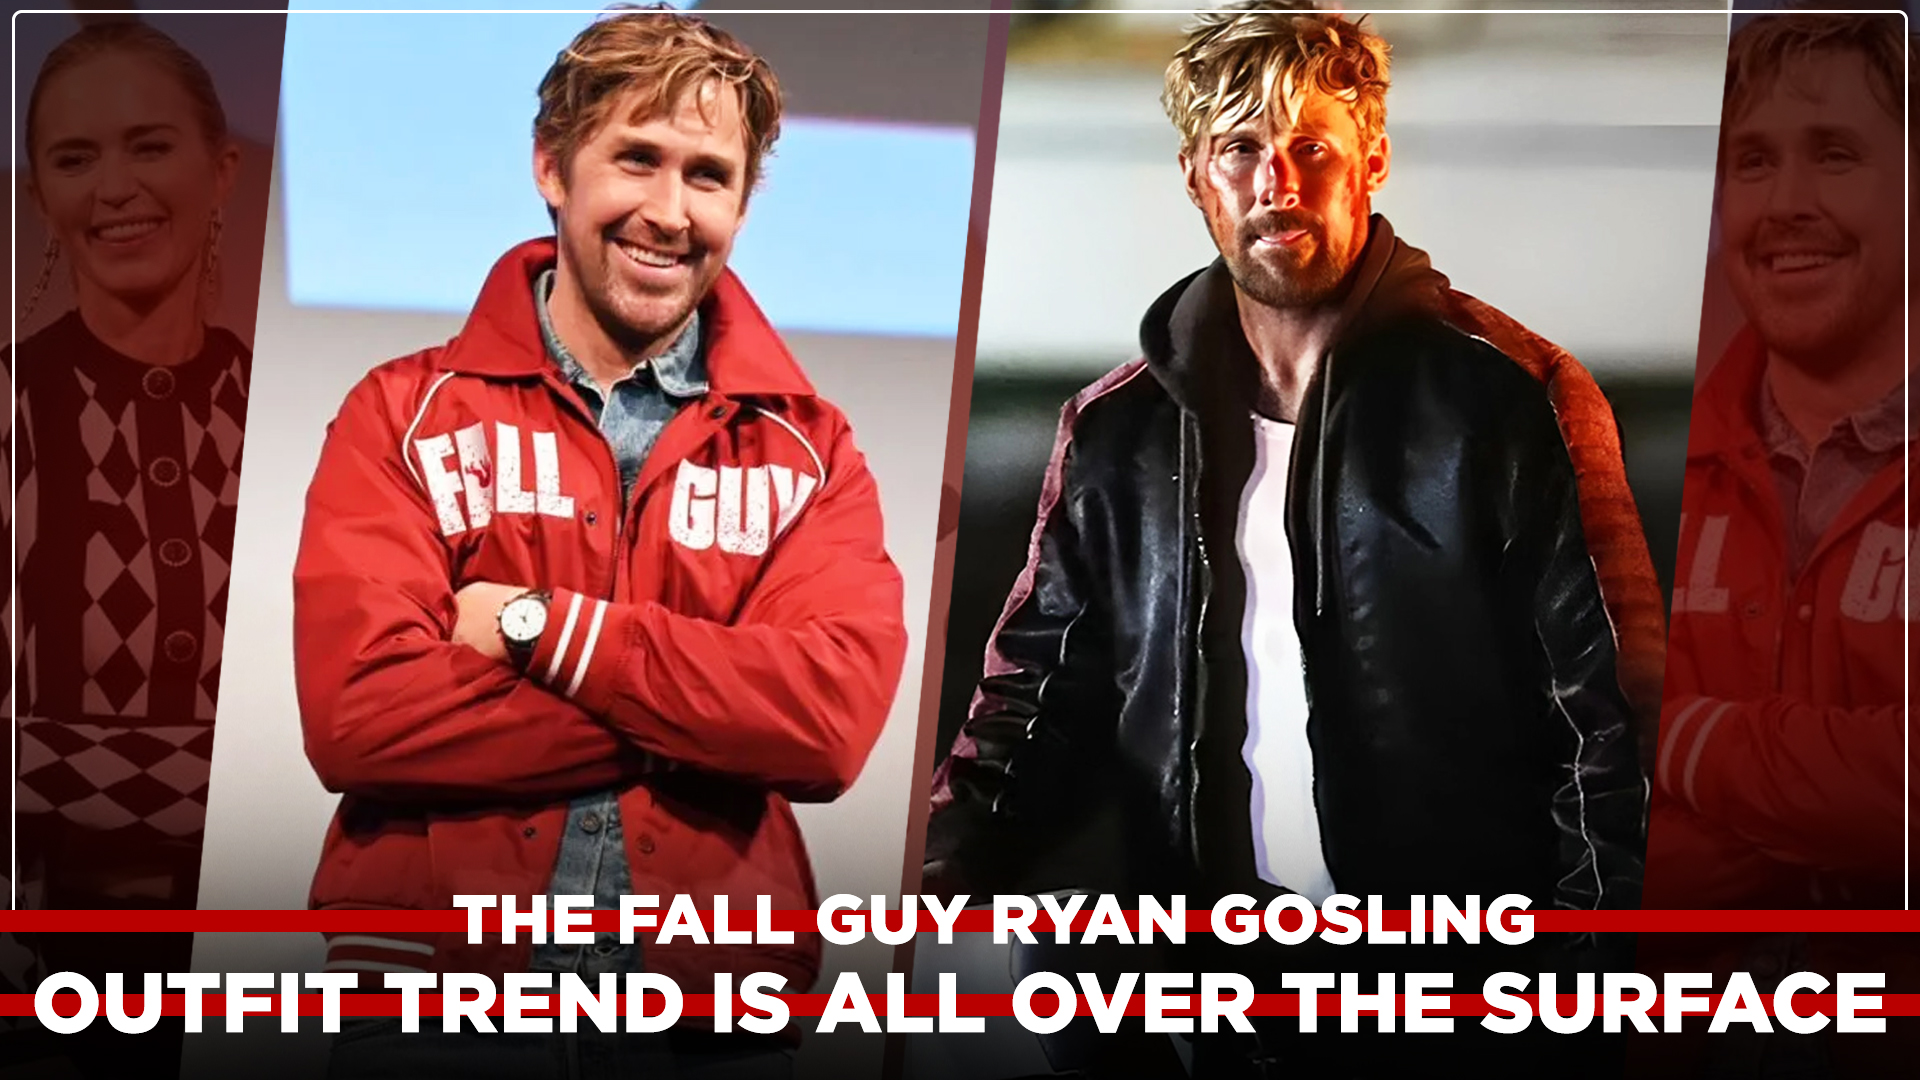 Stay on Trend With The Fall Guy Ryan Gosling Outfit